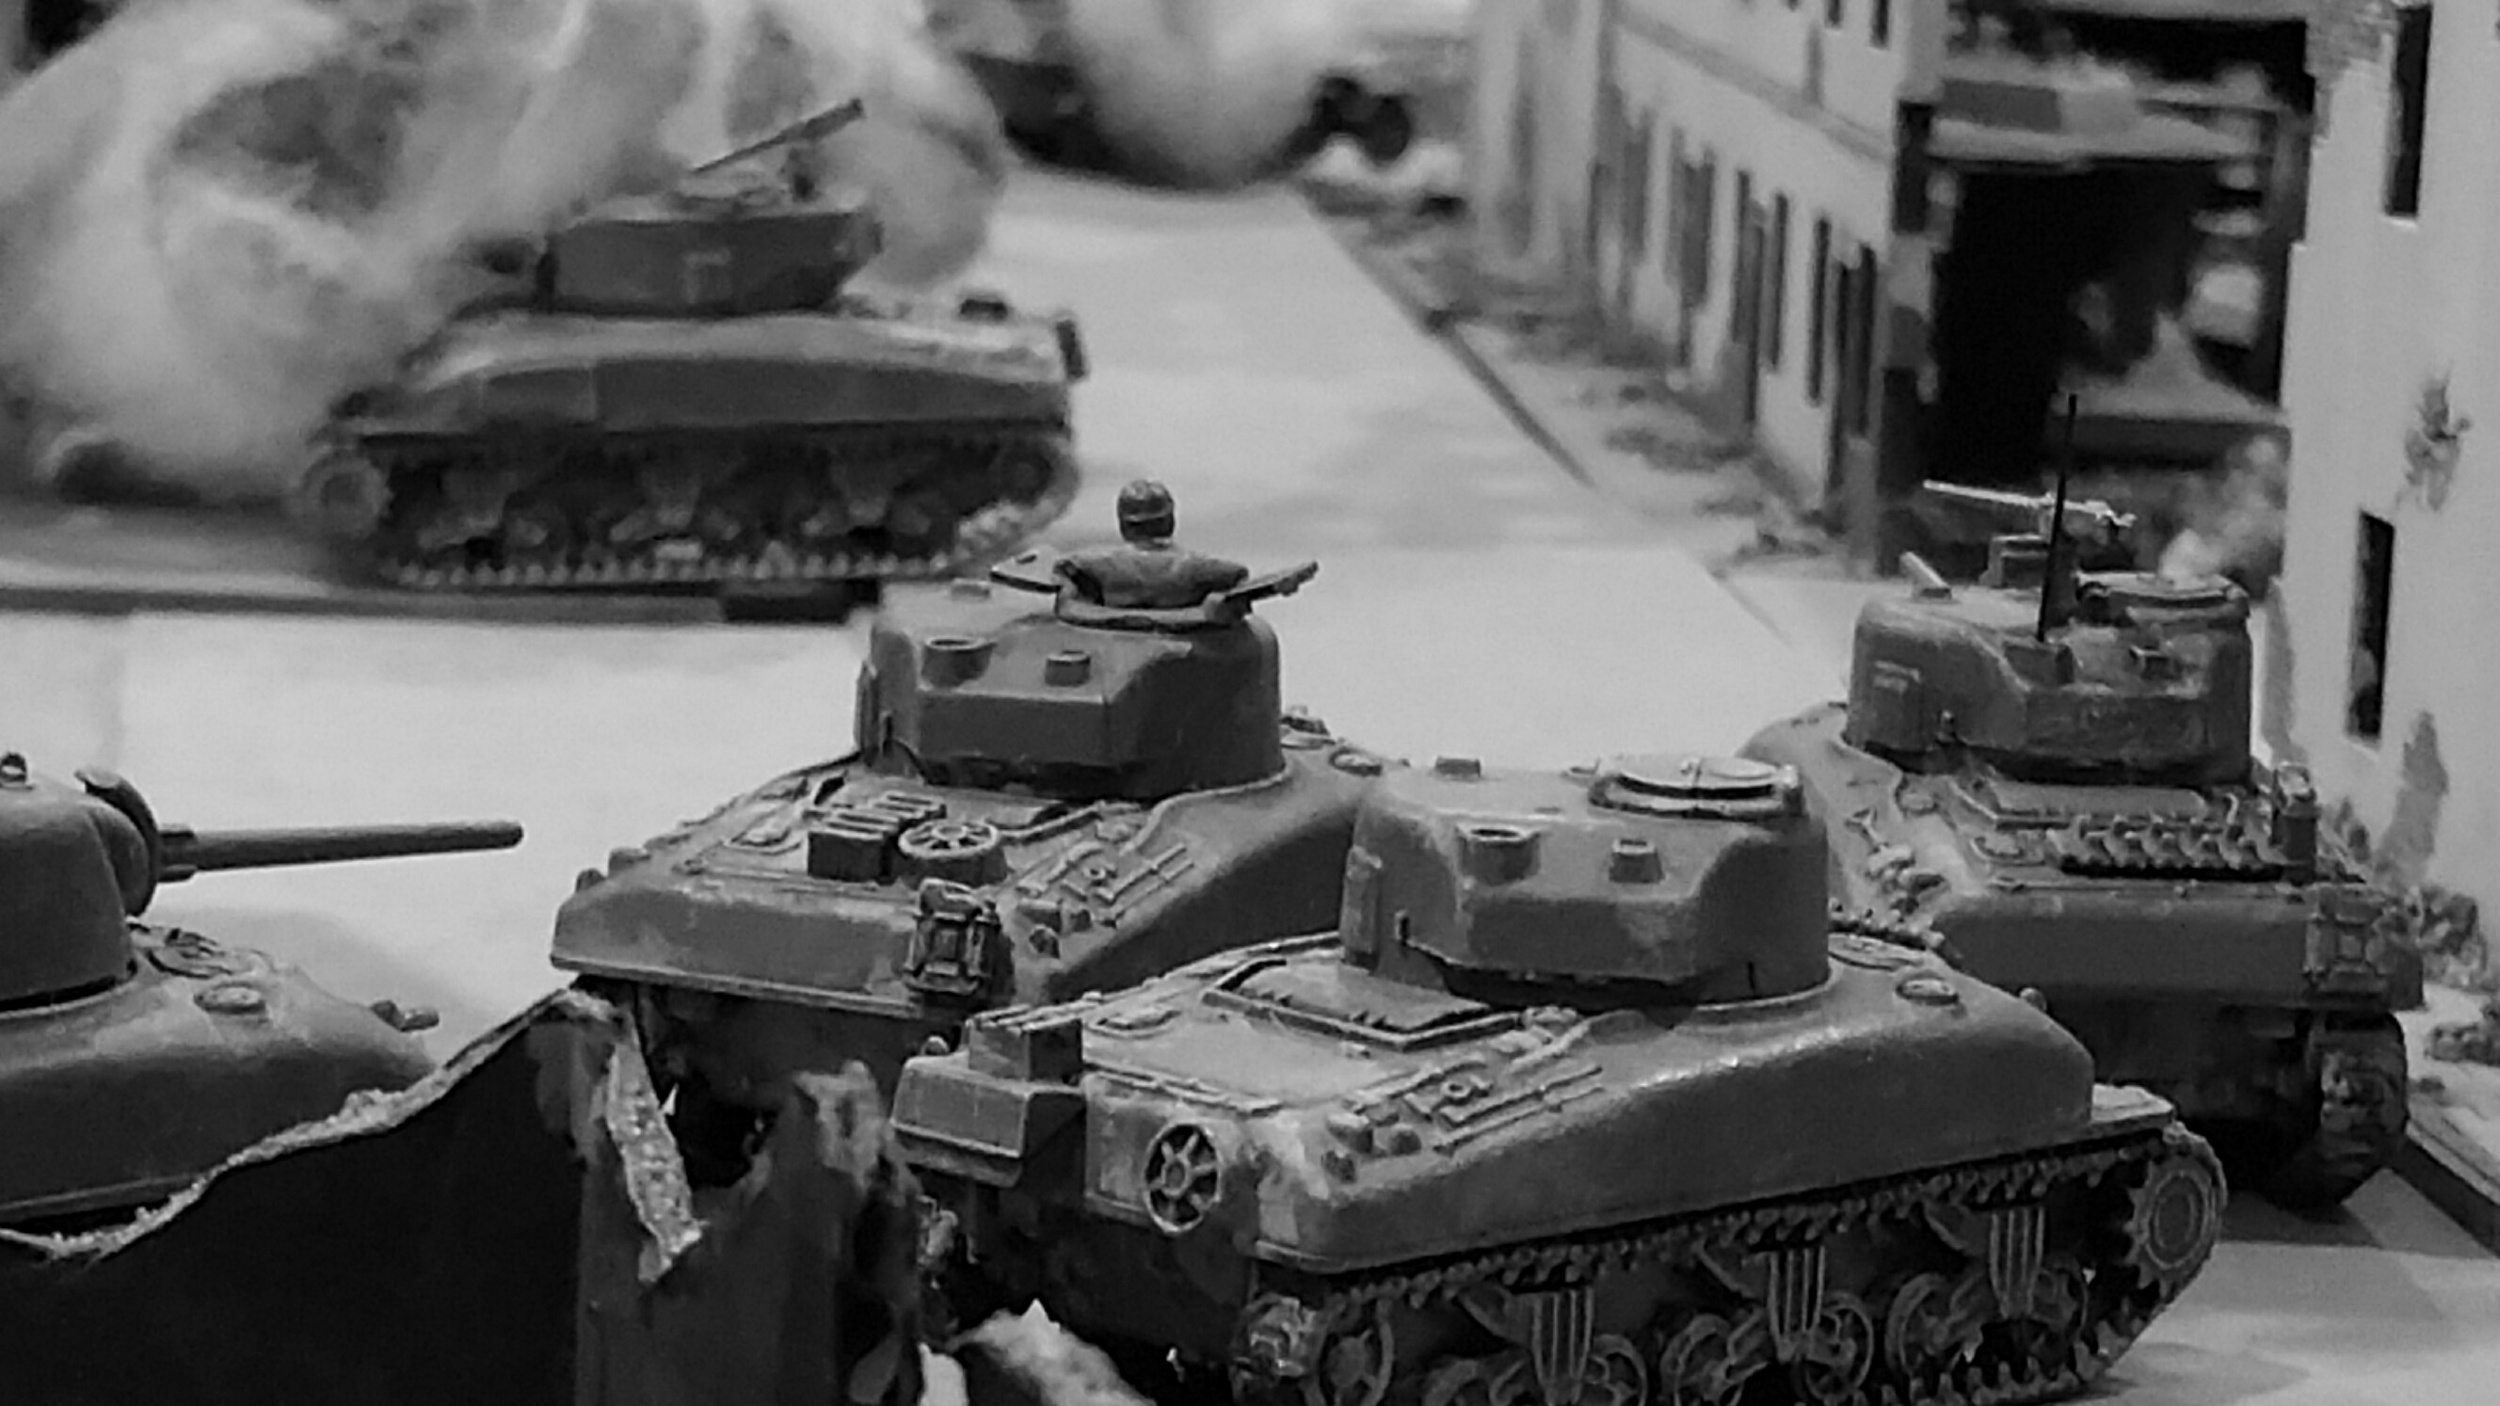   The surviving Shermans cower behind the last building in town, awaiting the last Tiger's approach.  